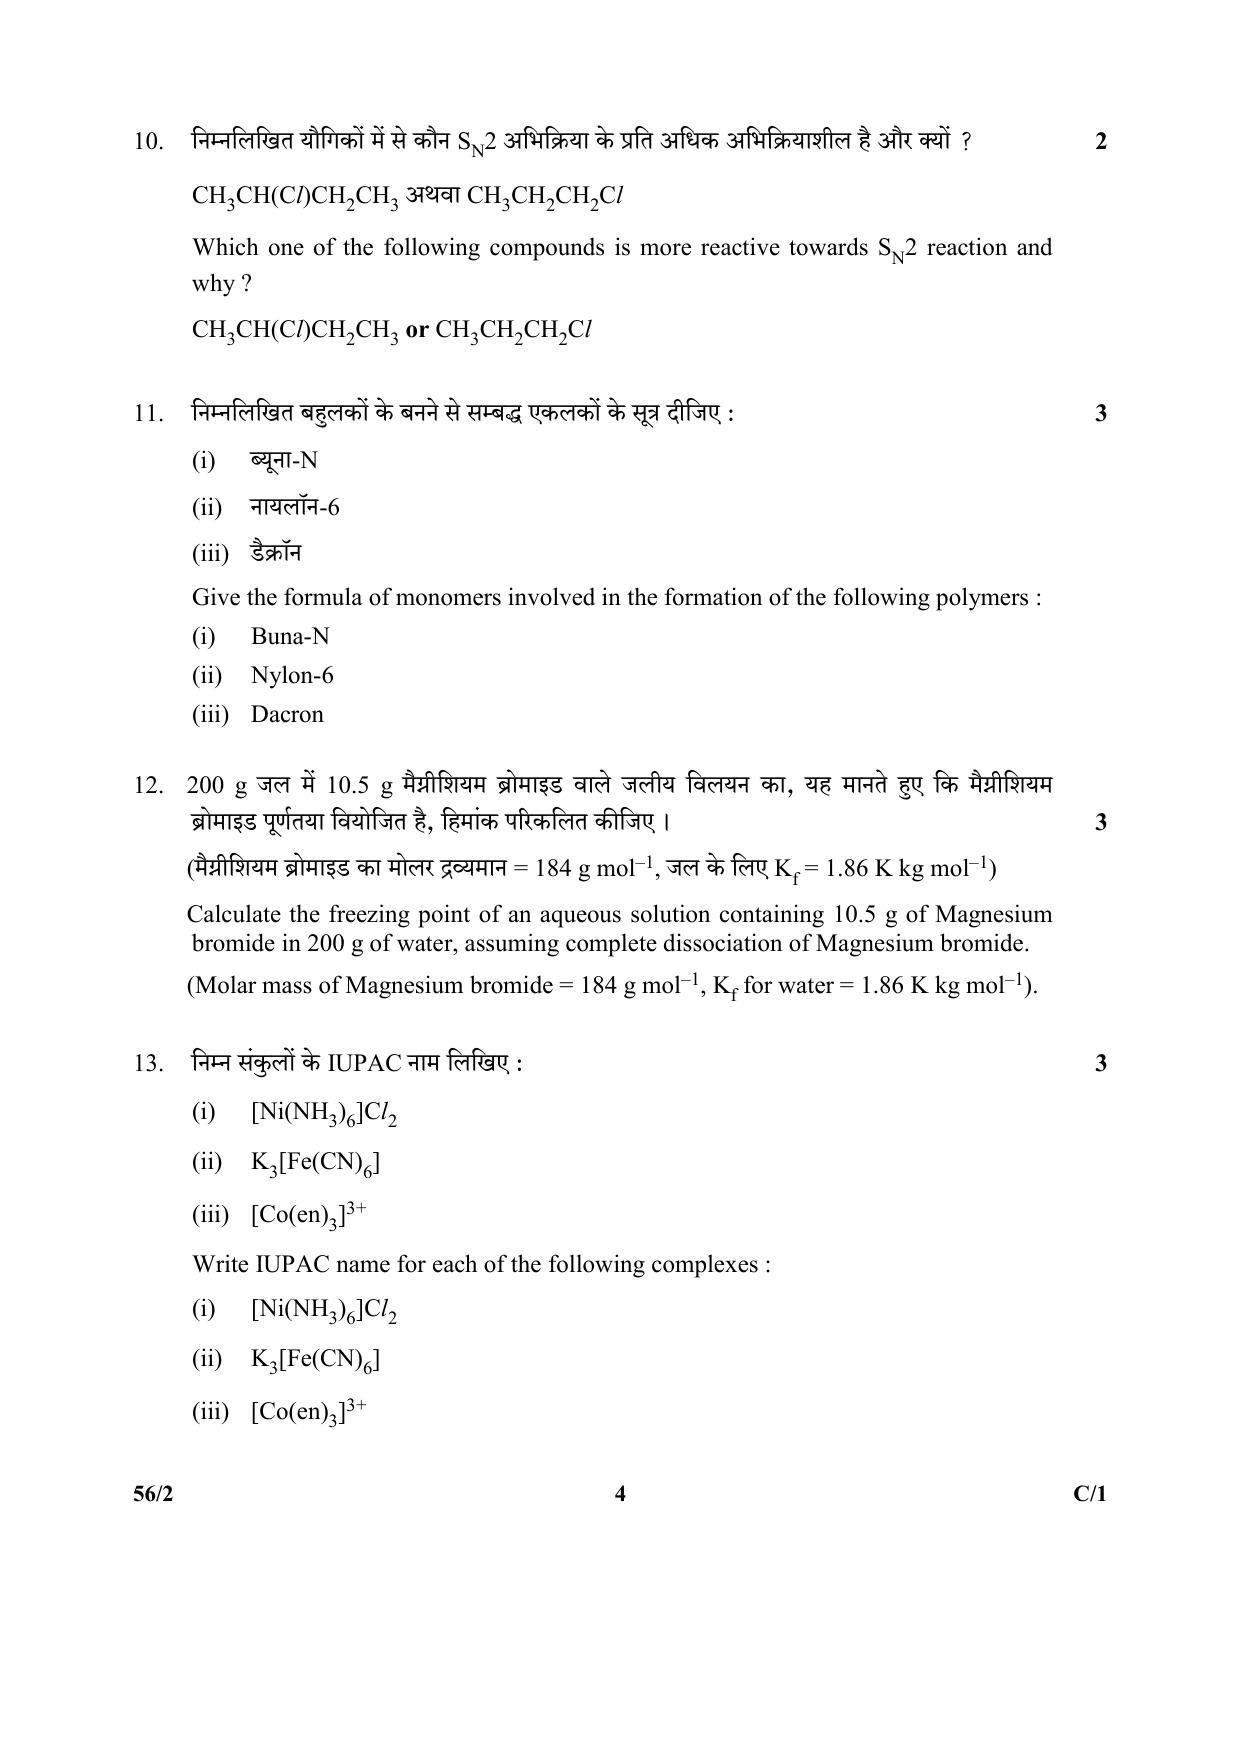 CBSE Class 12 56-2 (Chemistry) 2018 Compartment Question Paper - Page 4